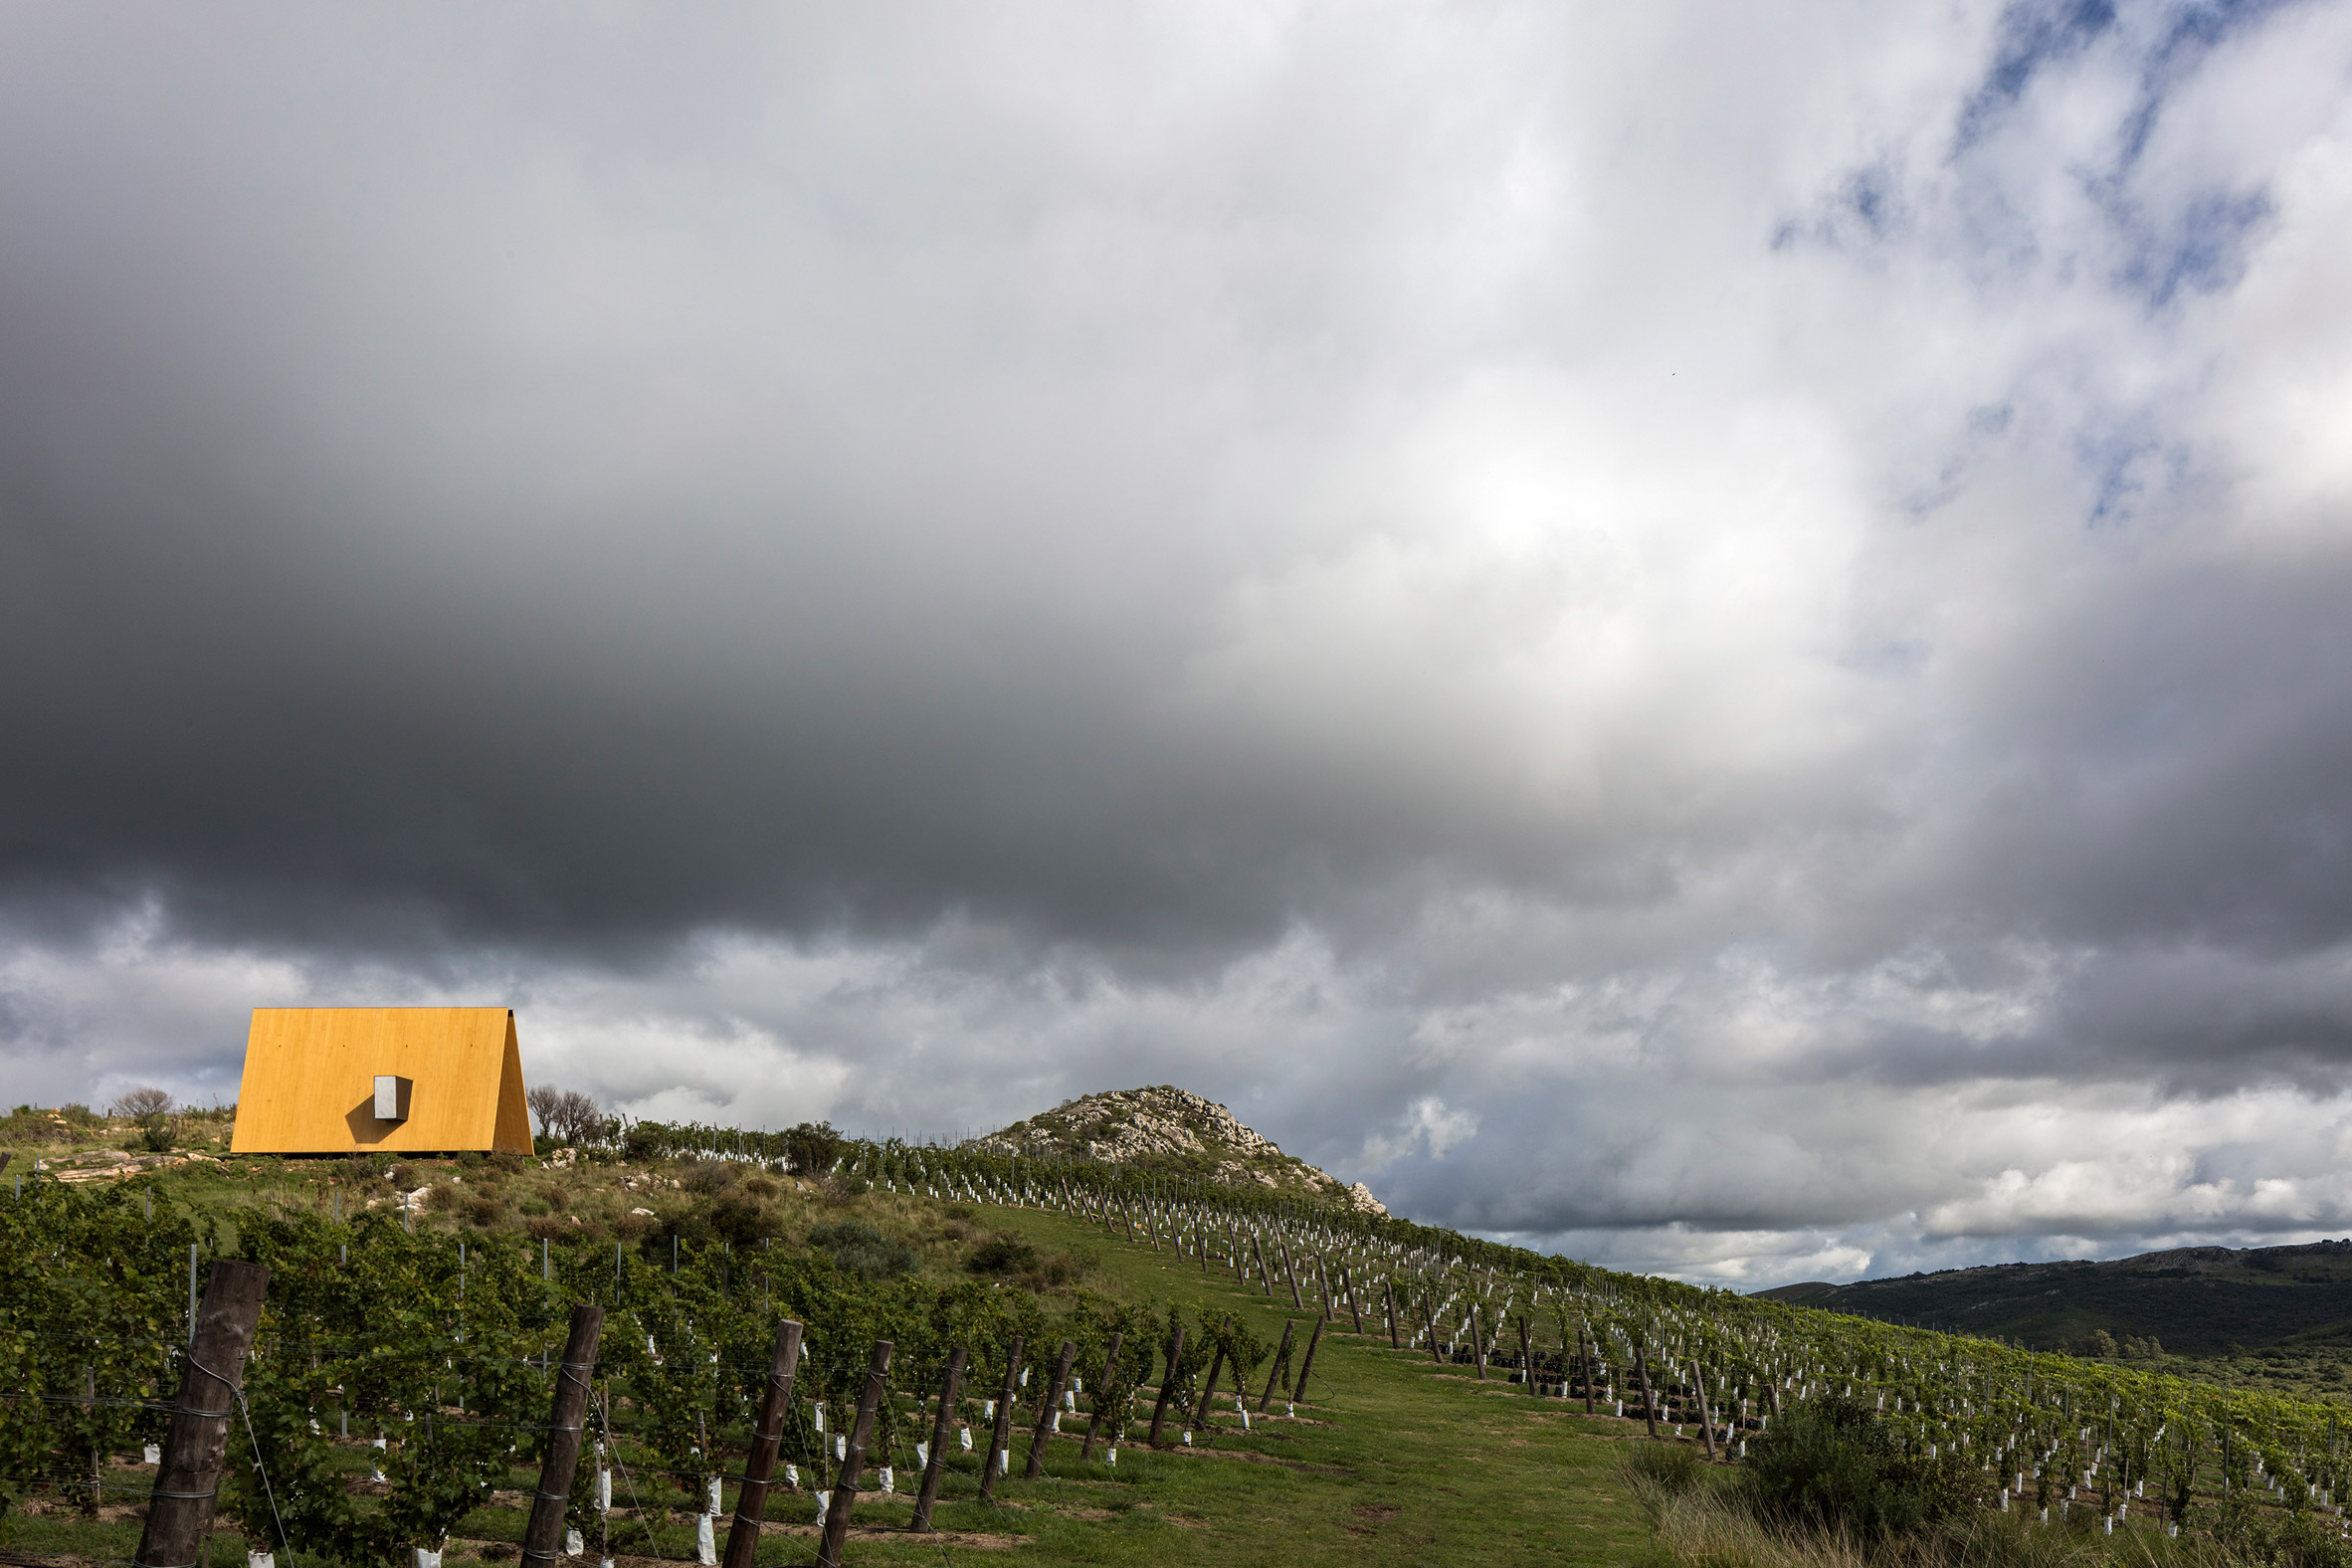 MAPA assembles "simple and austere" Sacromonte Chapel in Uruguay over one day